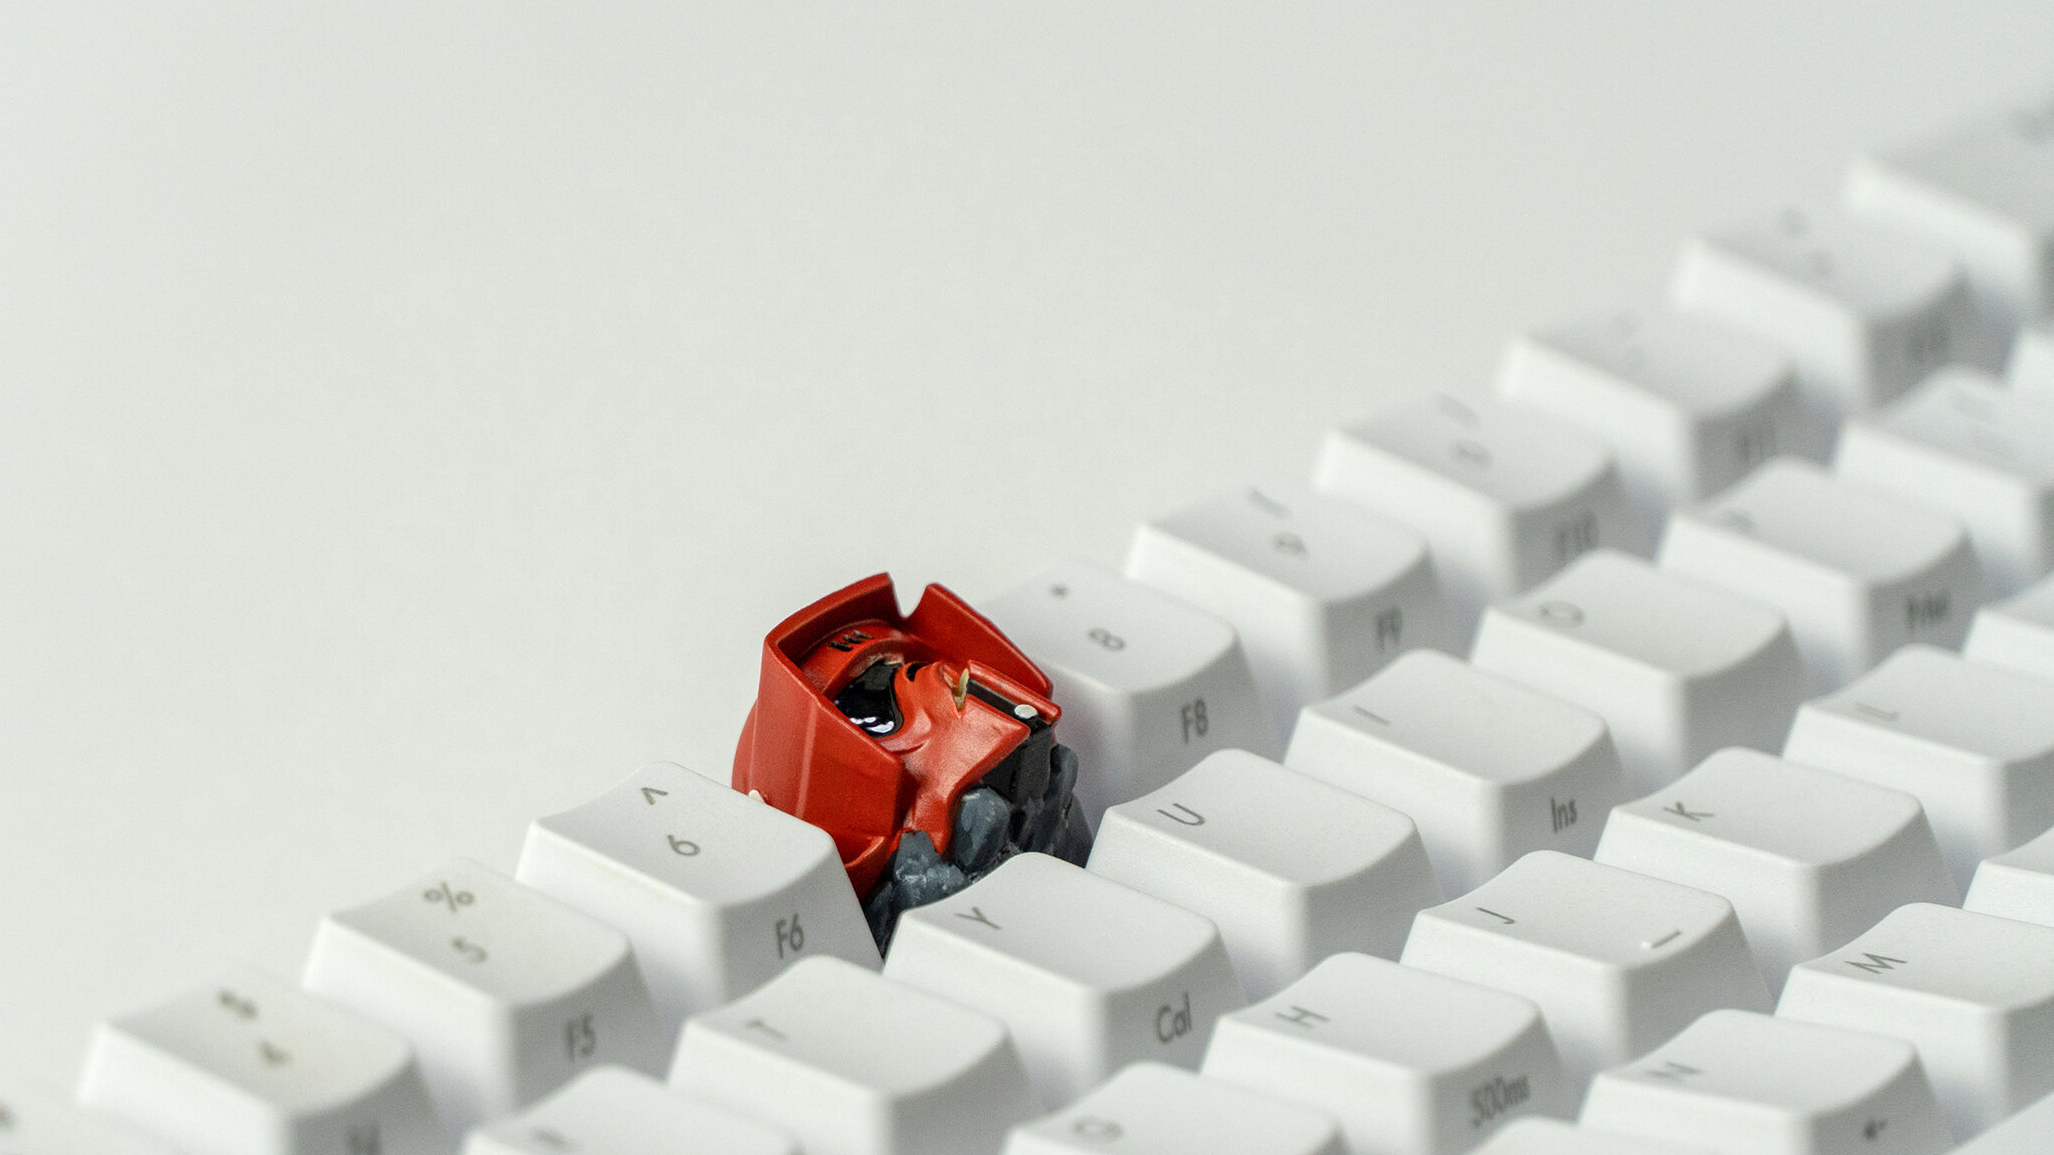 Venomous Keycaps - Bring Your Gaming Setup To The Next Level